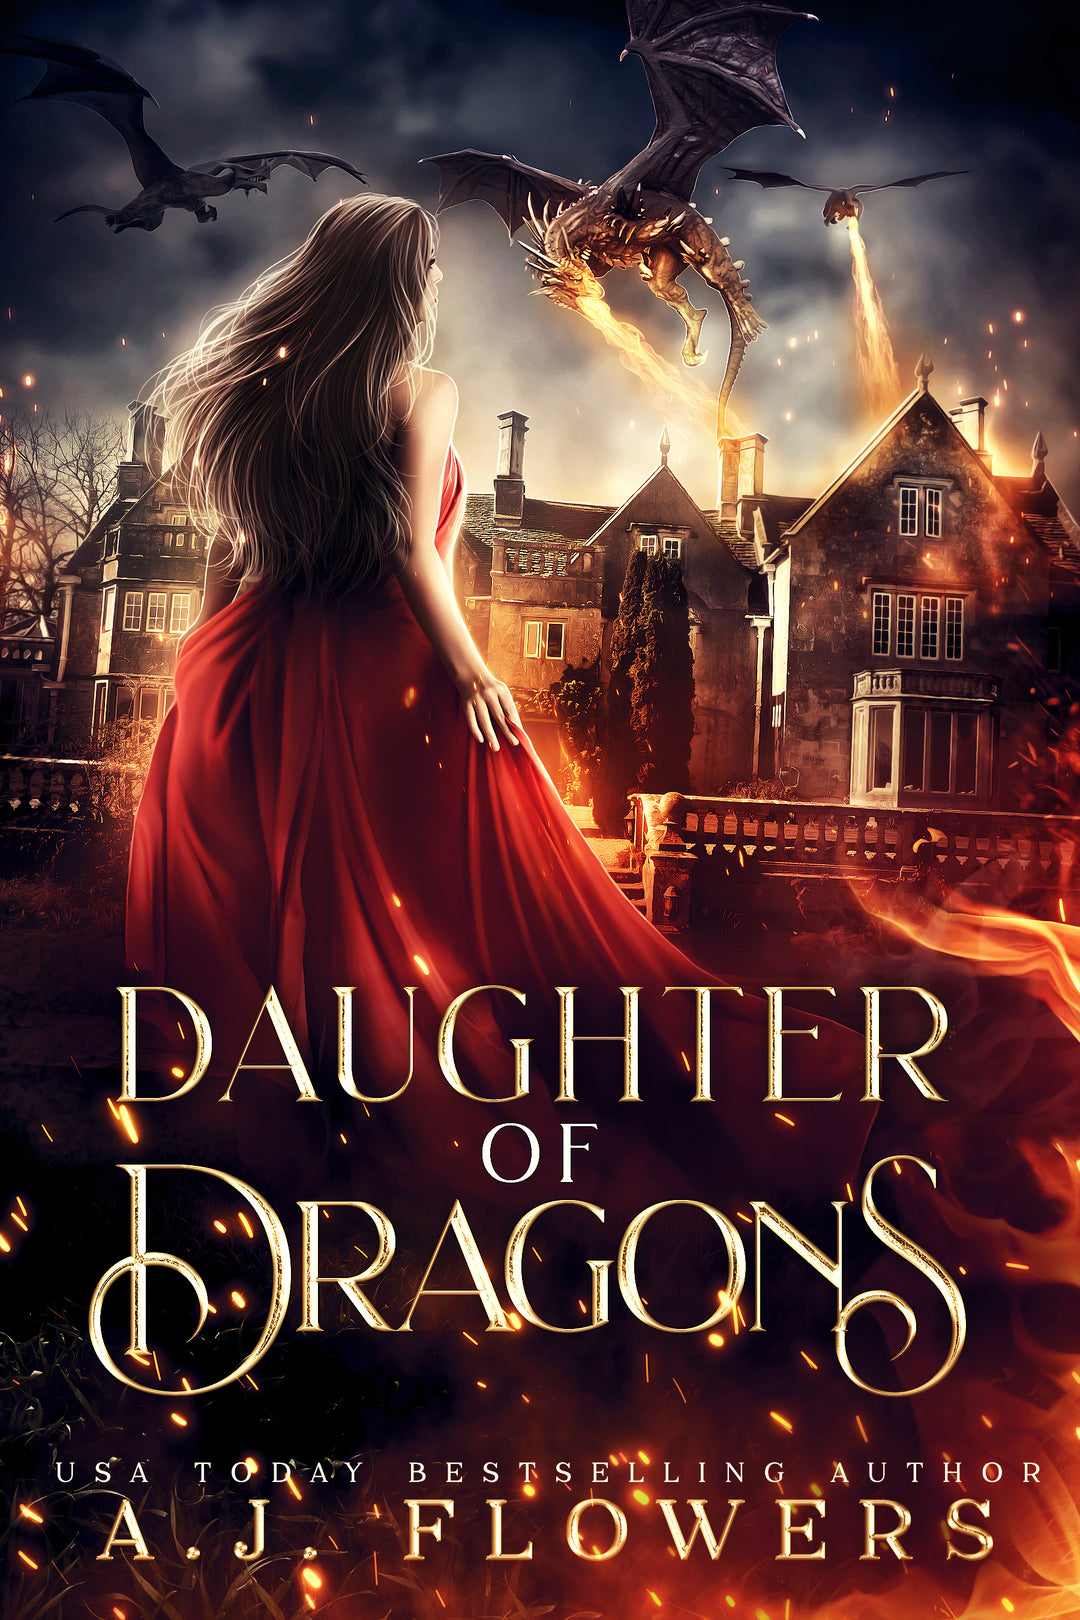 Daughter of Dragons by A.J. Flowers (YA pen name of J.R. Thorn)